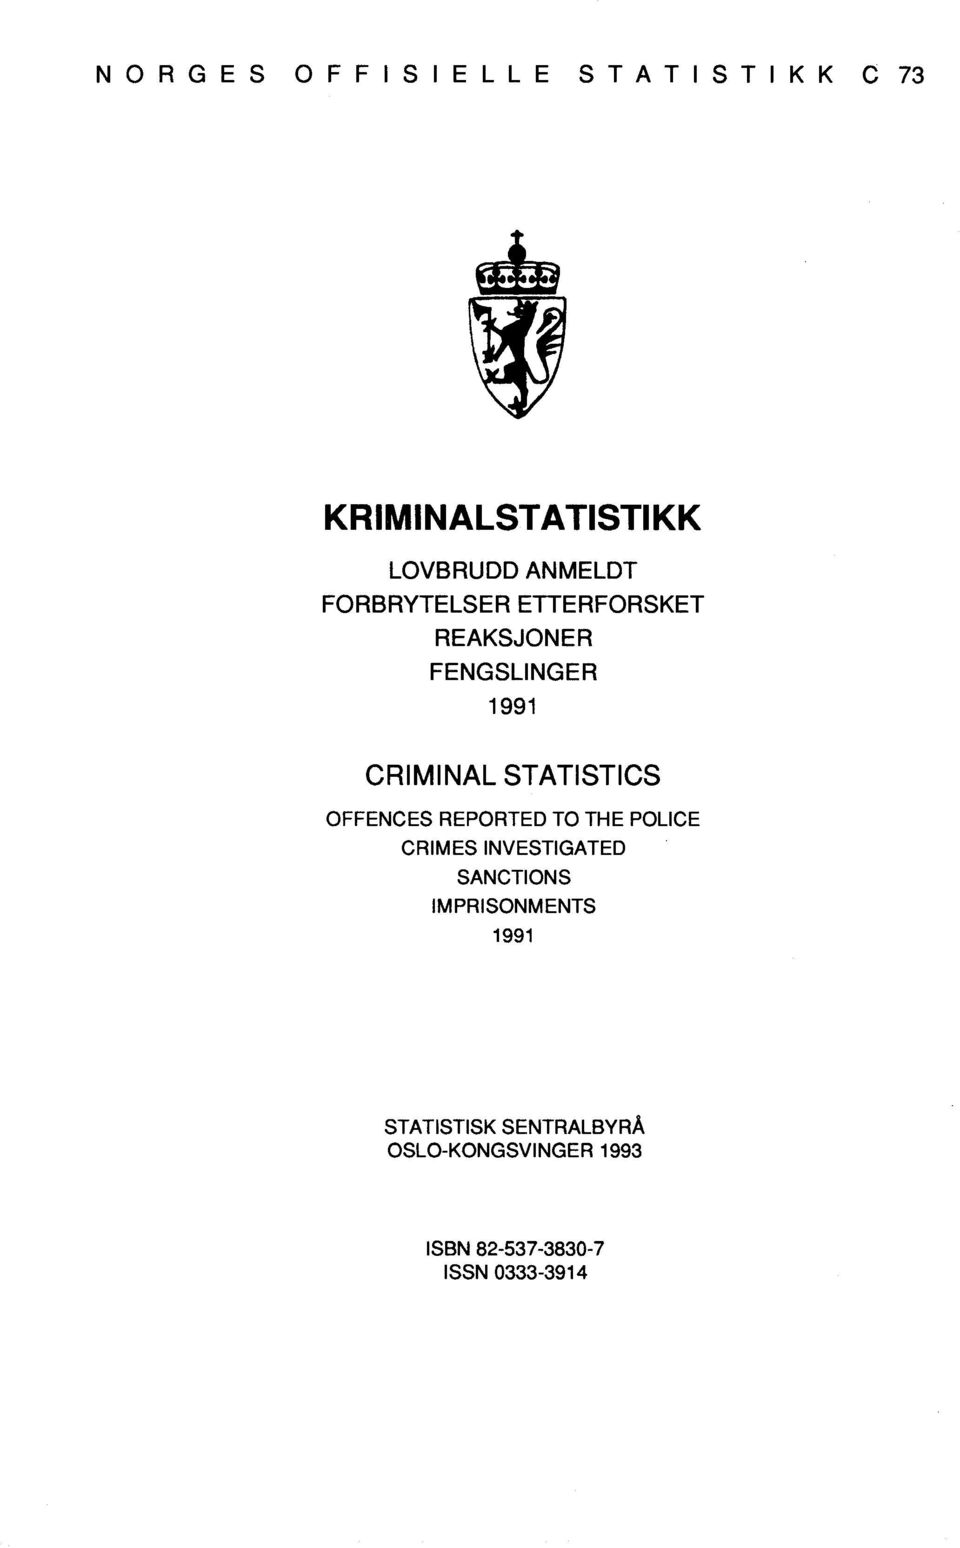 STATISTICS OFFENCES REPORTED TO THE POLICE CRIMES INVESTIGATED